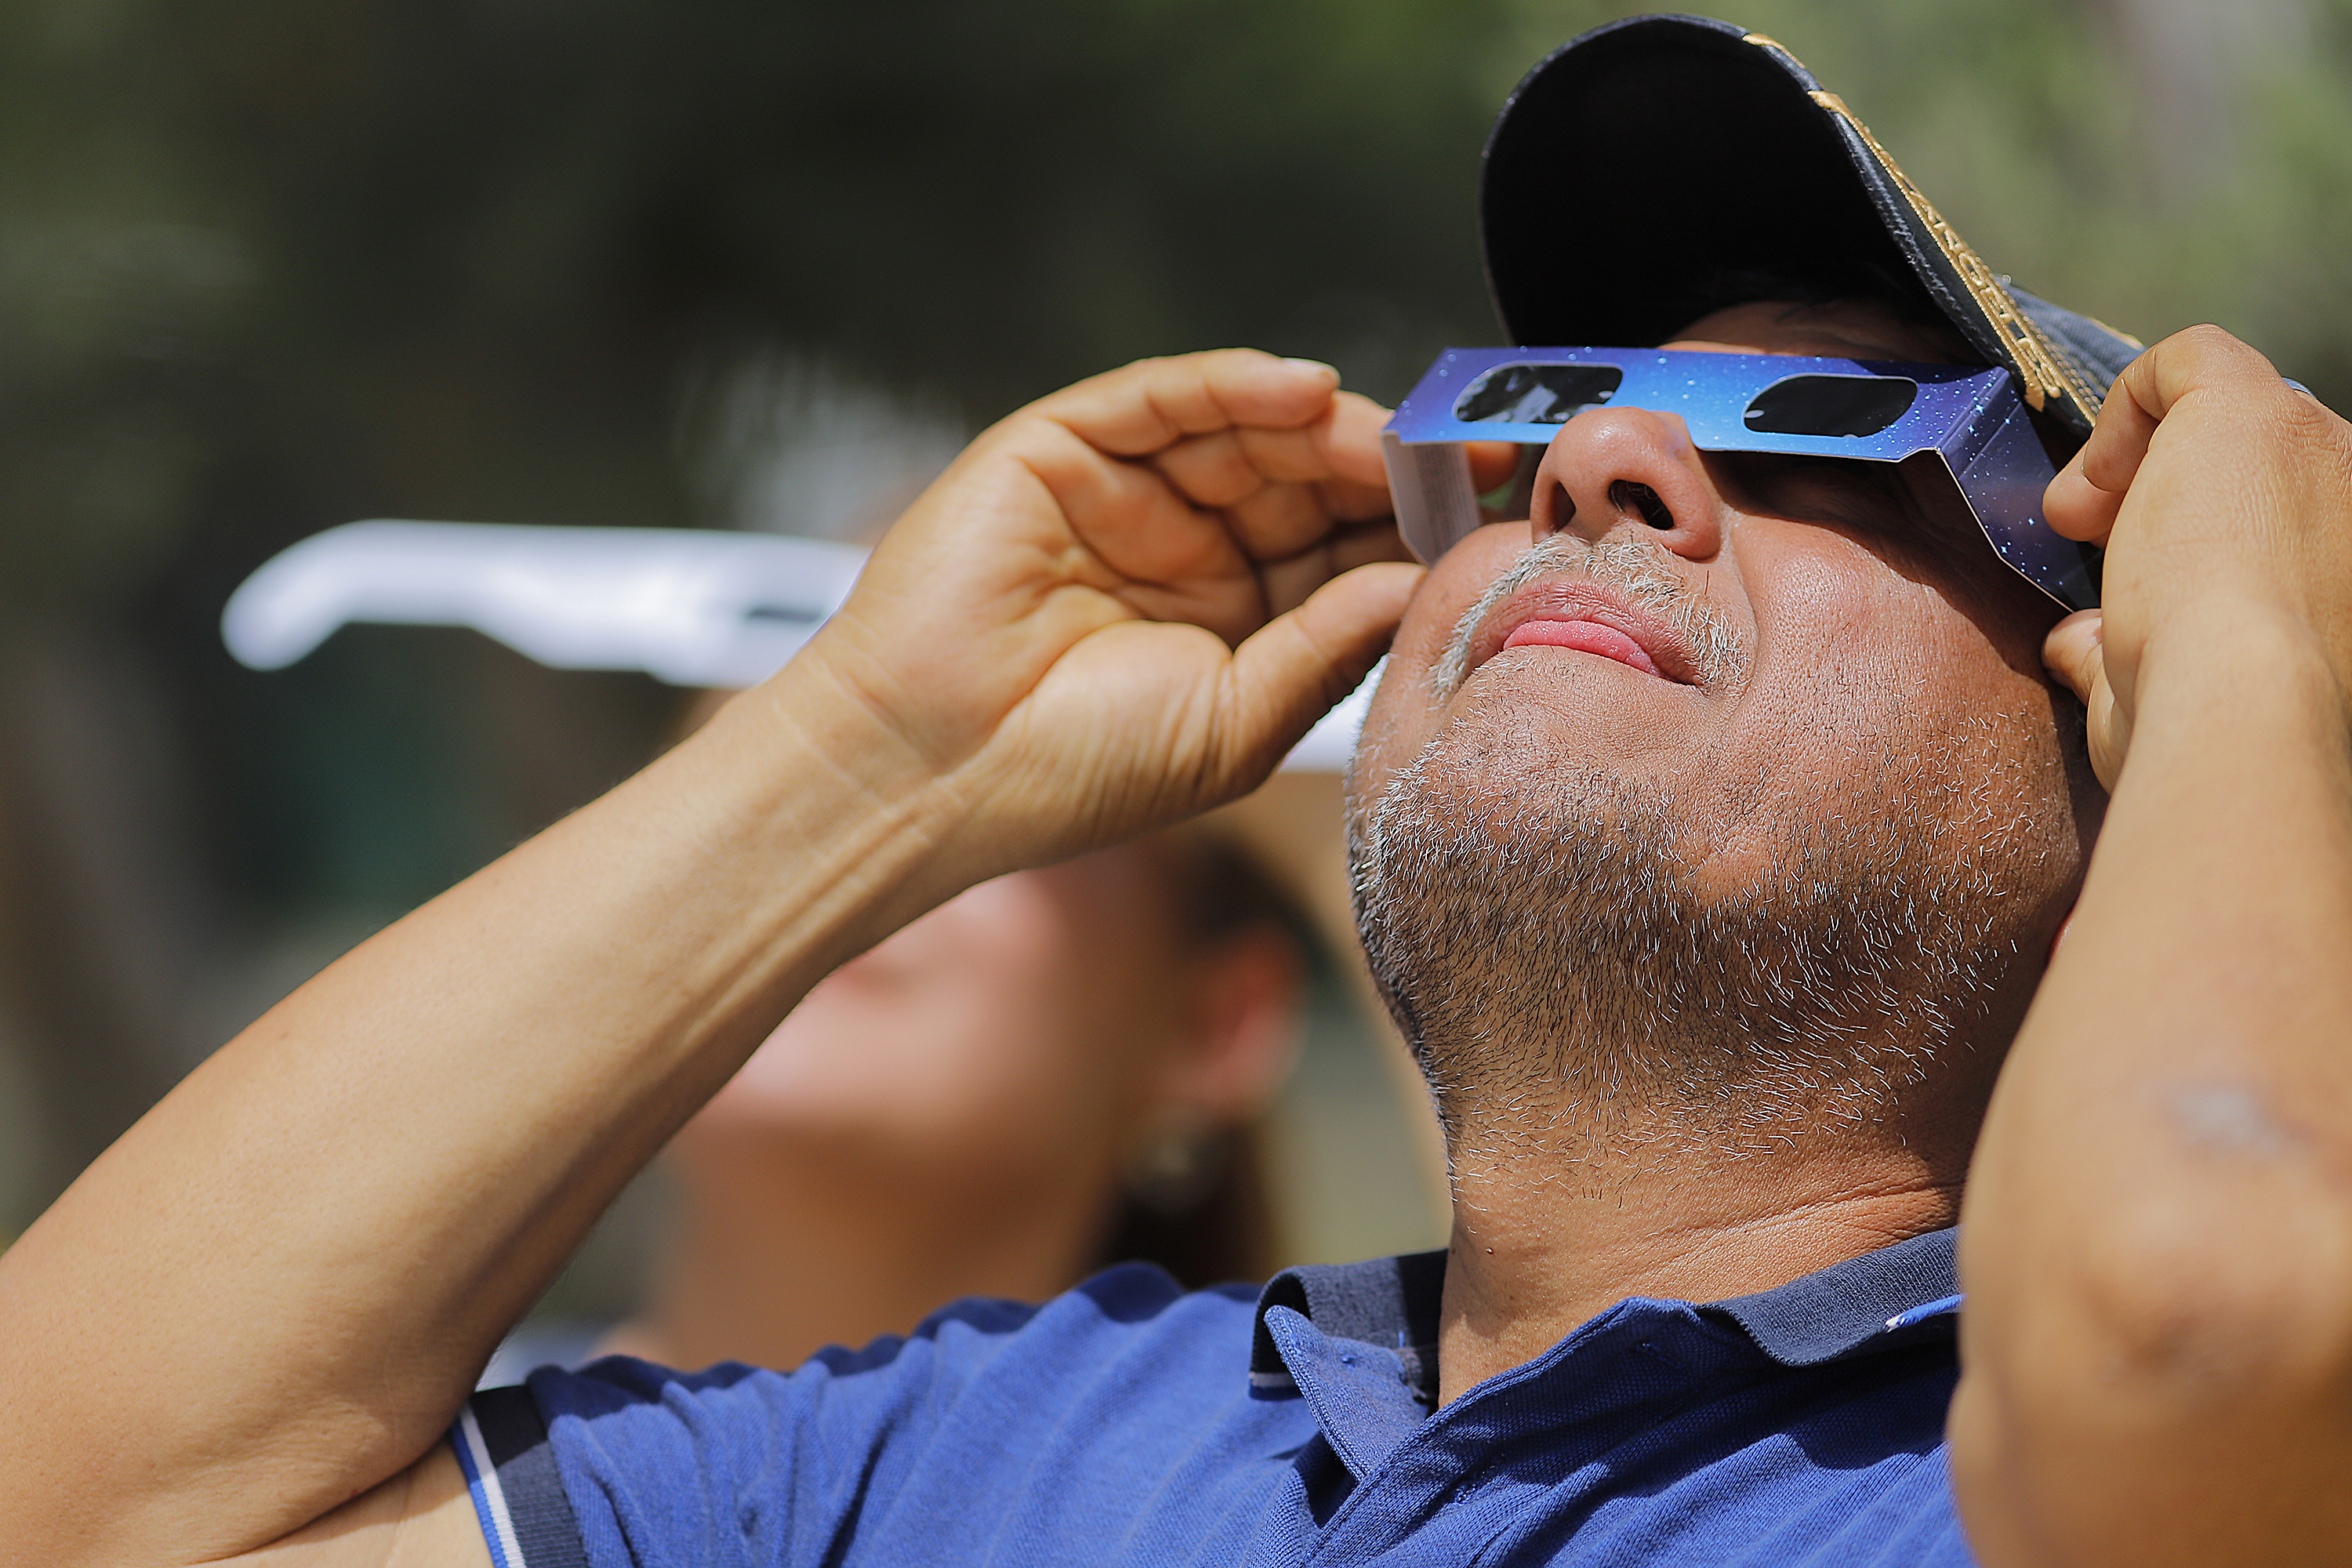 Solar eclipse glasses recall sparks immediate warning